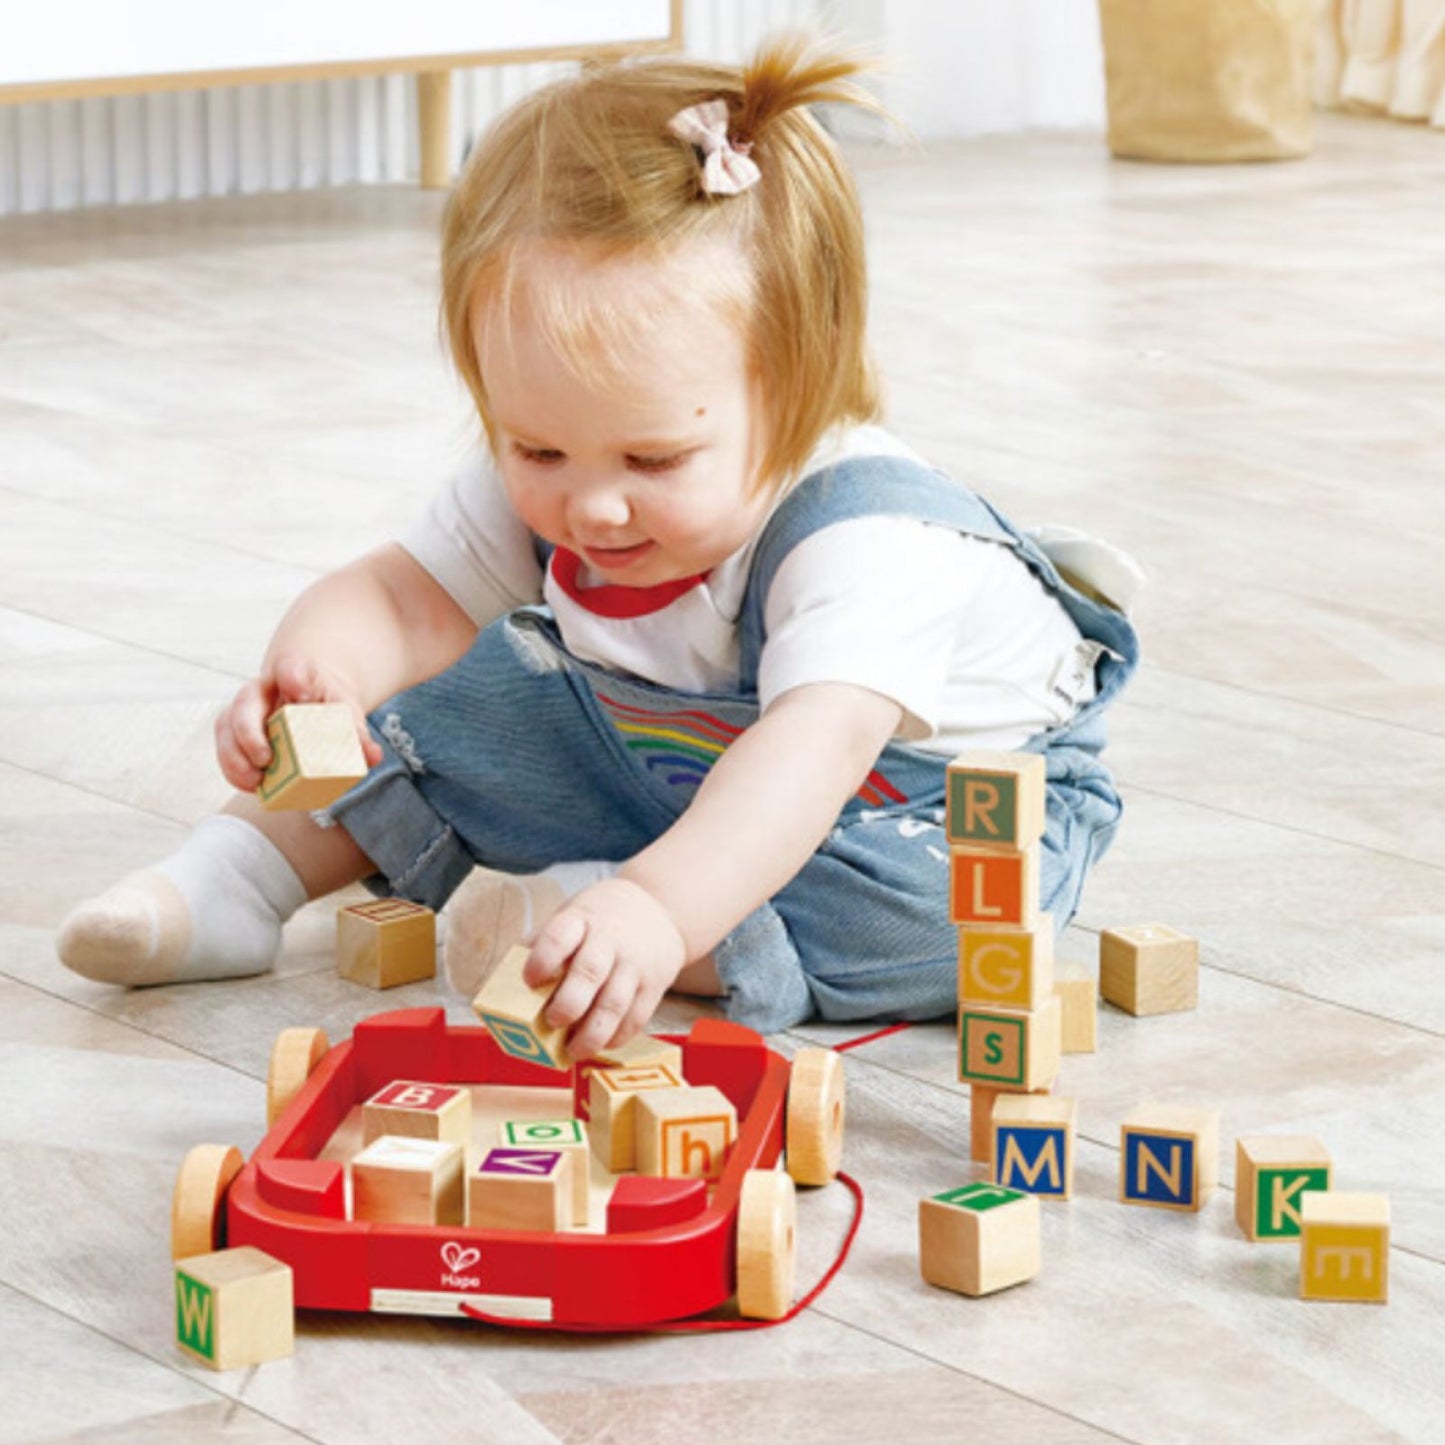 Hape - Pull Along Cart with Stacking Blocks